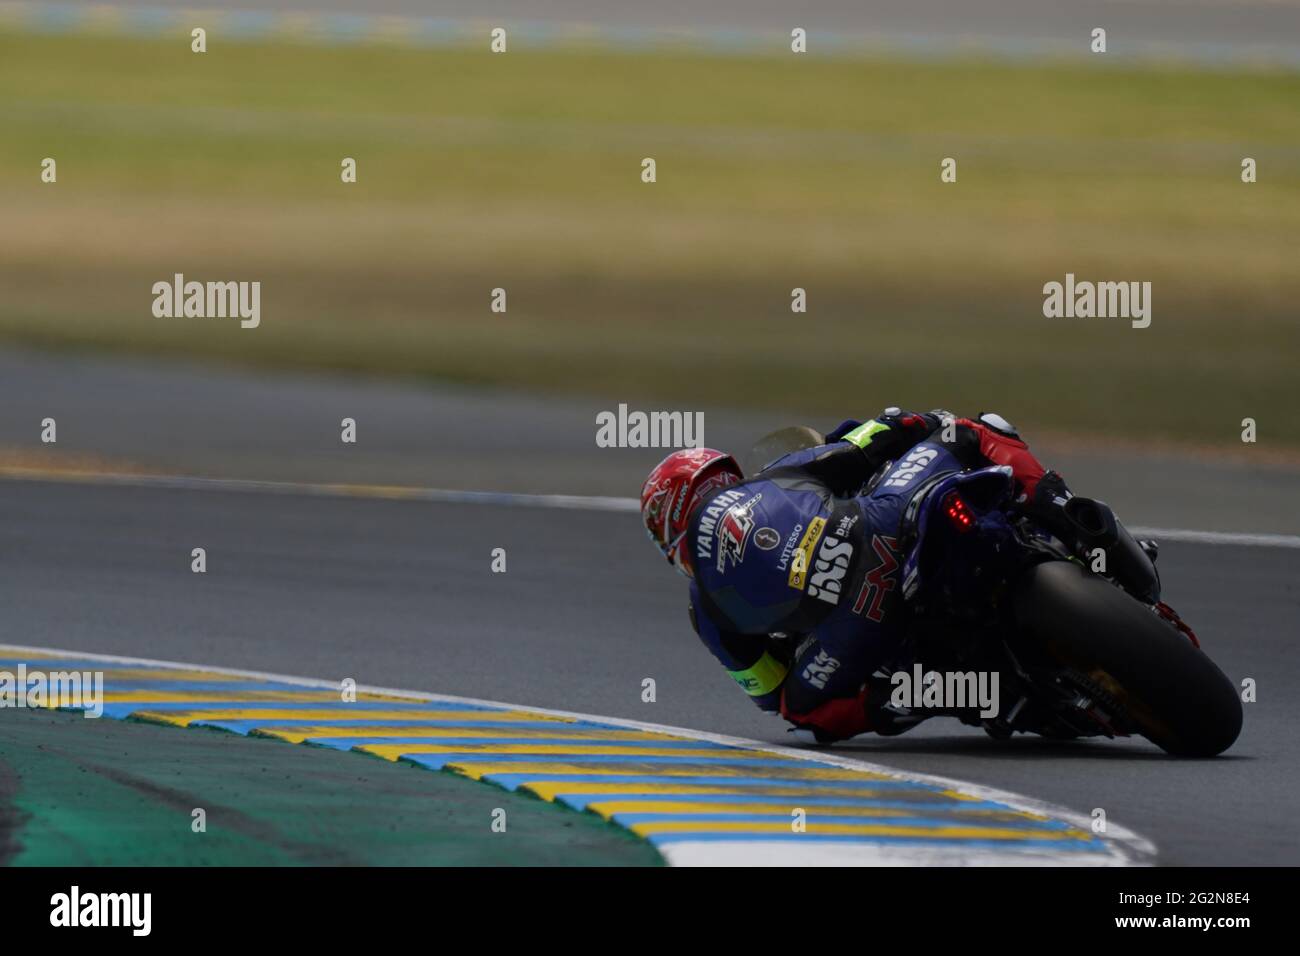 Le Mans, Sarthe, France. 12th June, 2021. YART - YAMAHA YZF R1 - #7 NICOLO  CANEPA (ITA) in action during the race of 44th edition of the 24 hours  motorcycle of Le